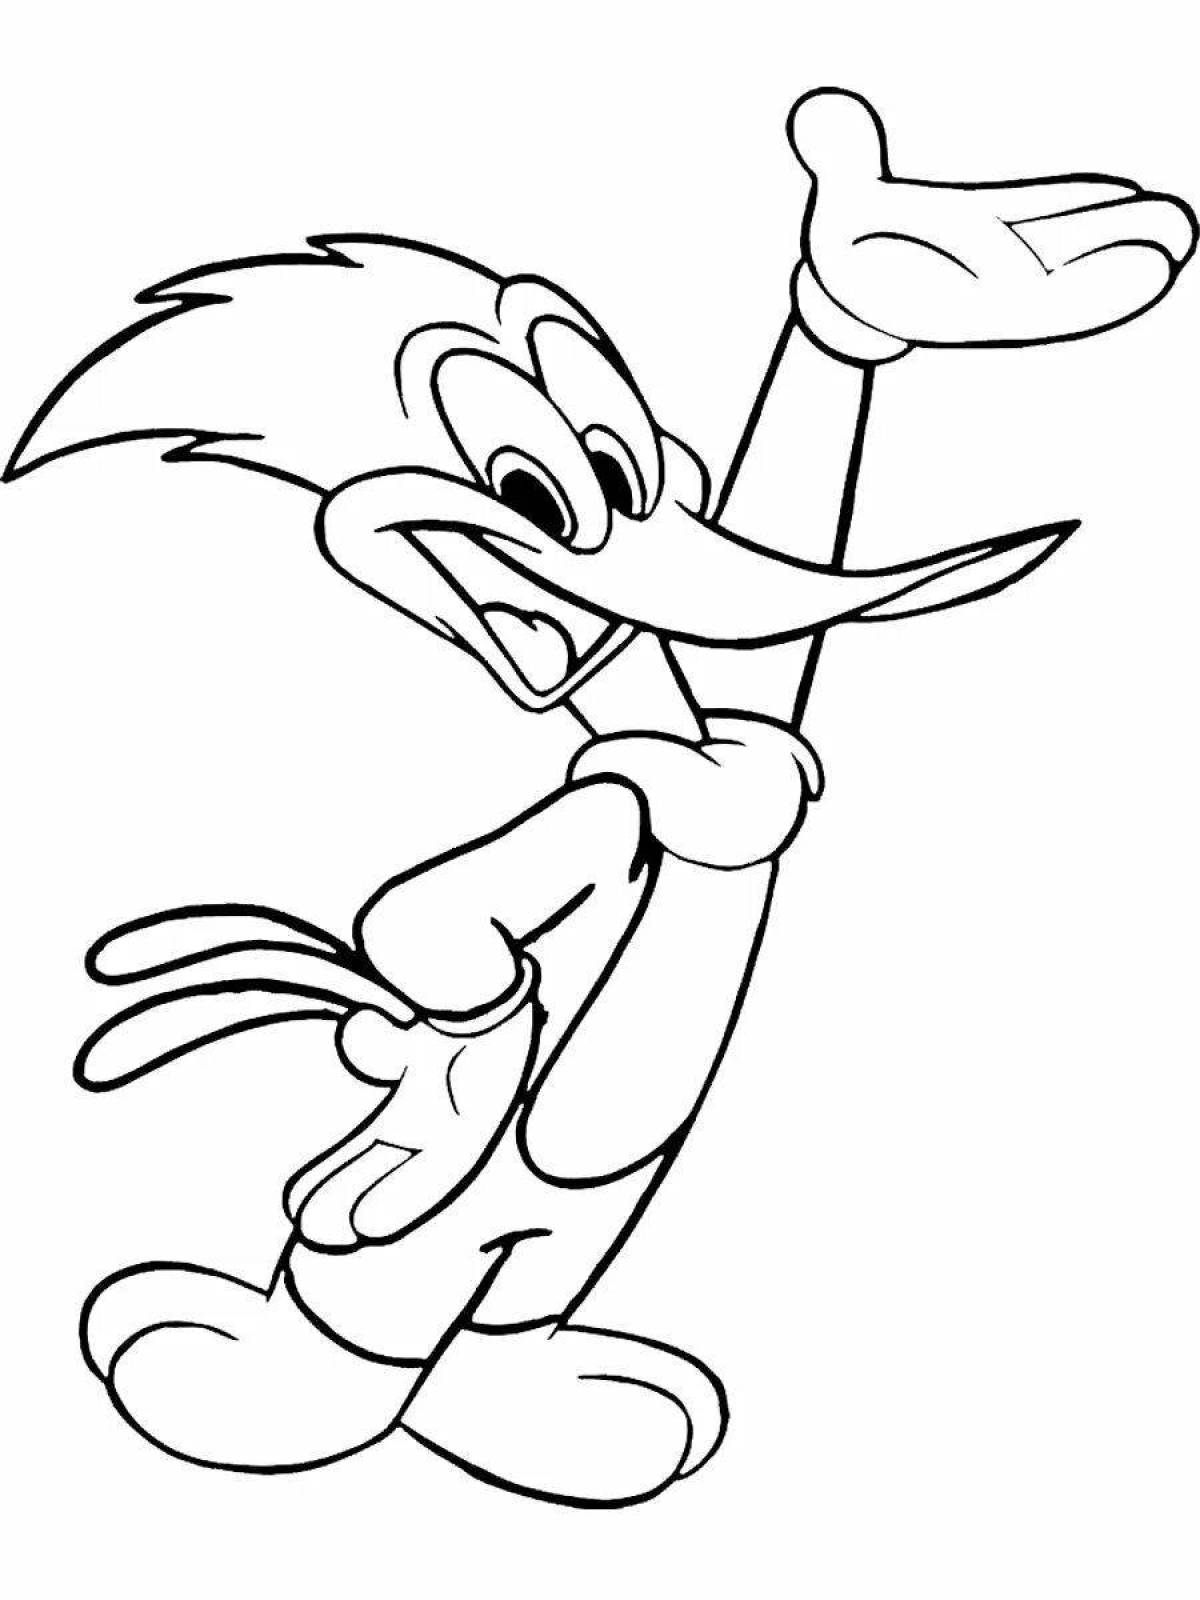 Coloring the amazing woody woodpecker